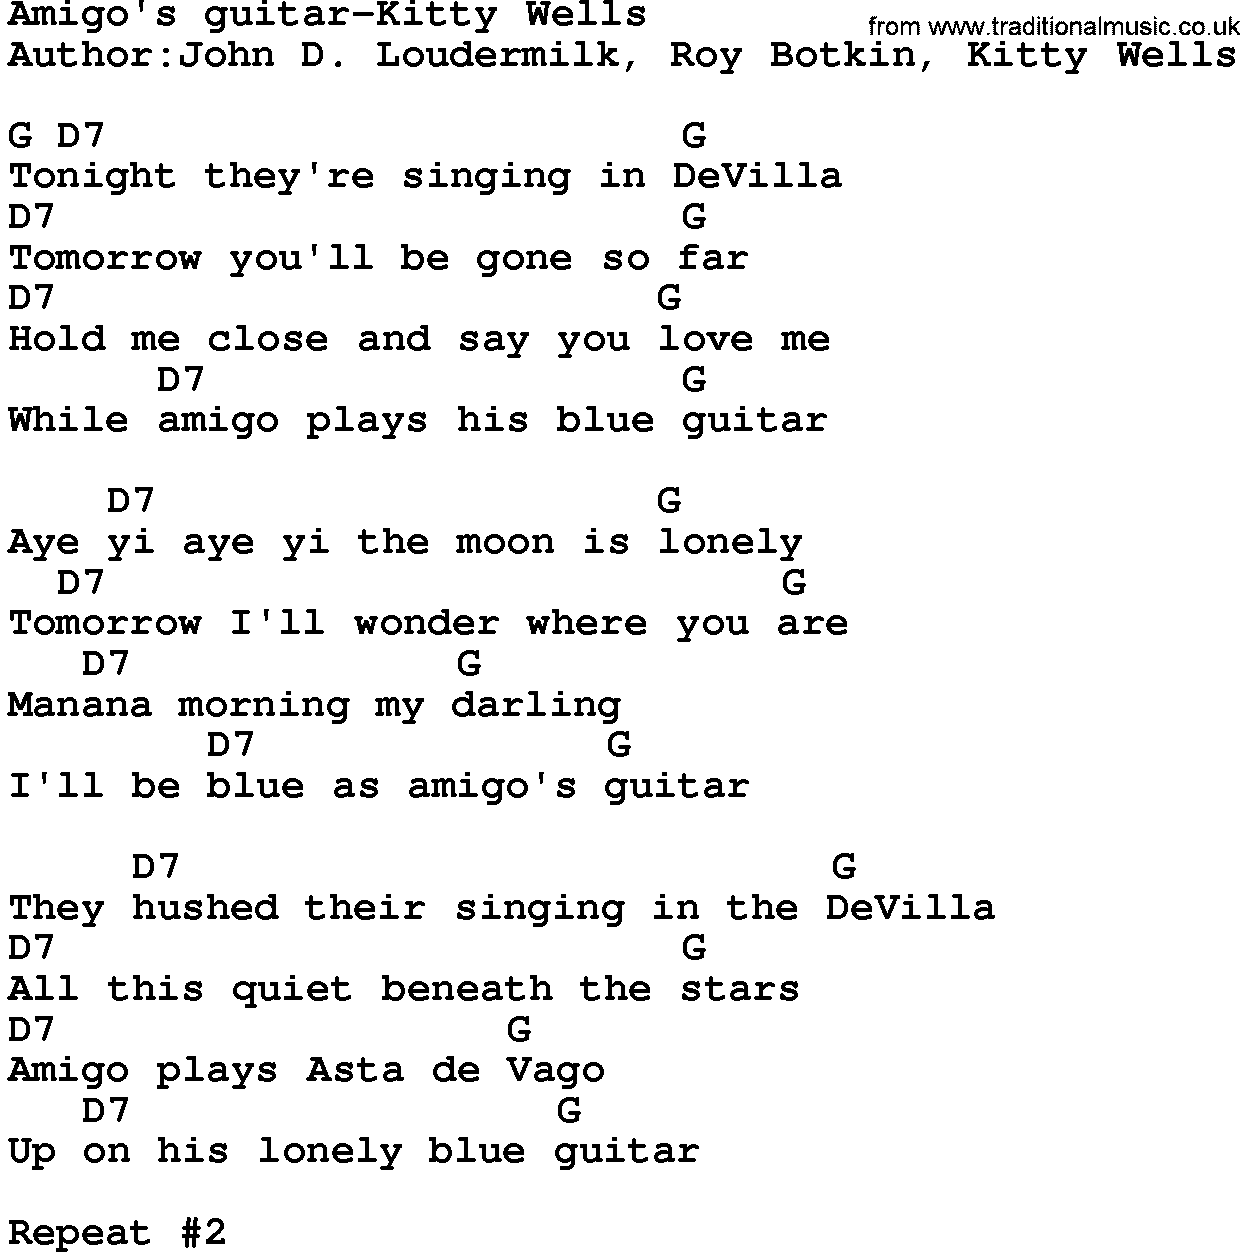 Country music song: Amigo's Guitar-Kitty Wells lyrics and chords